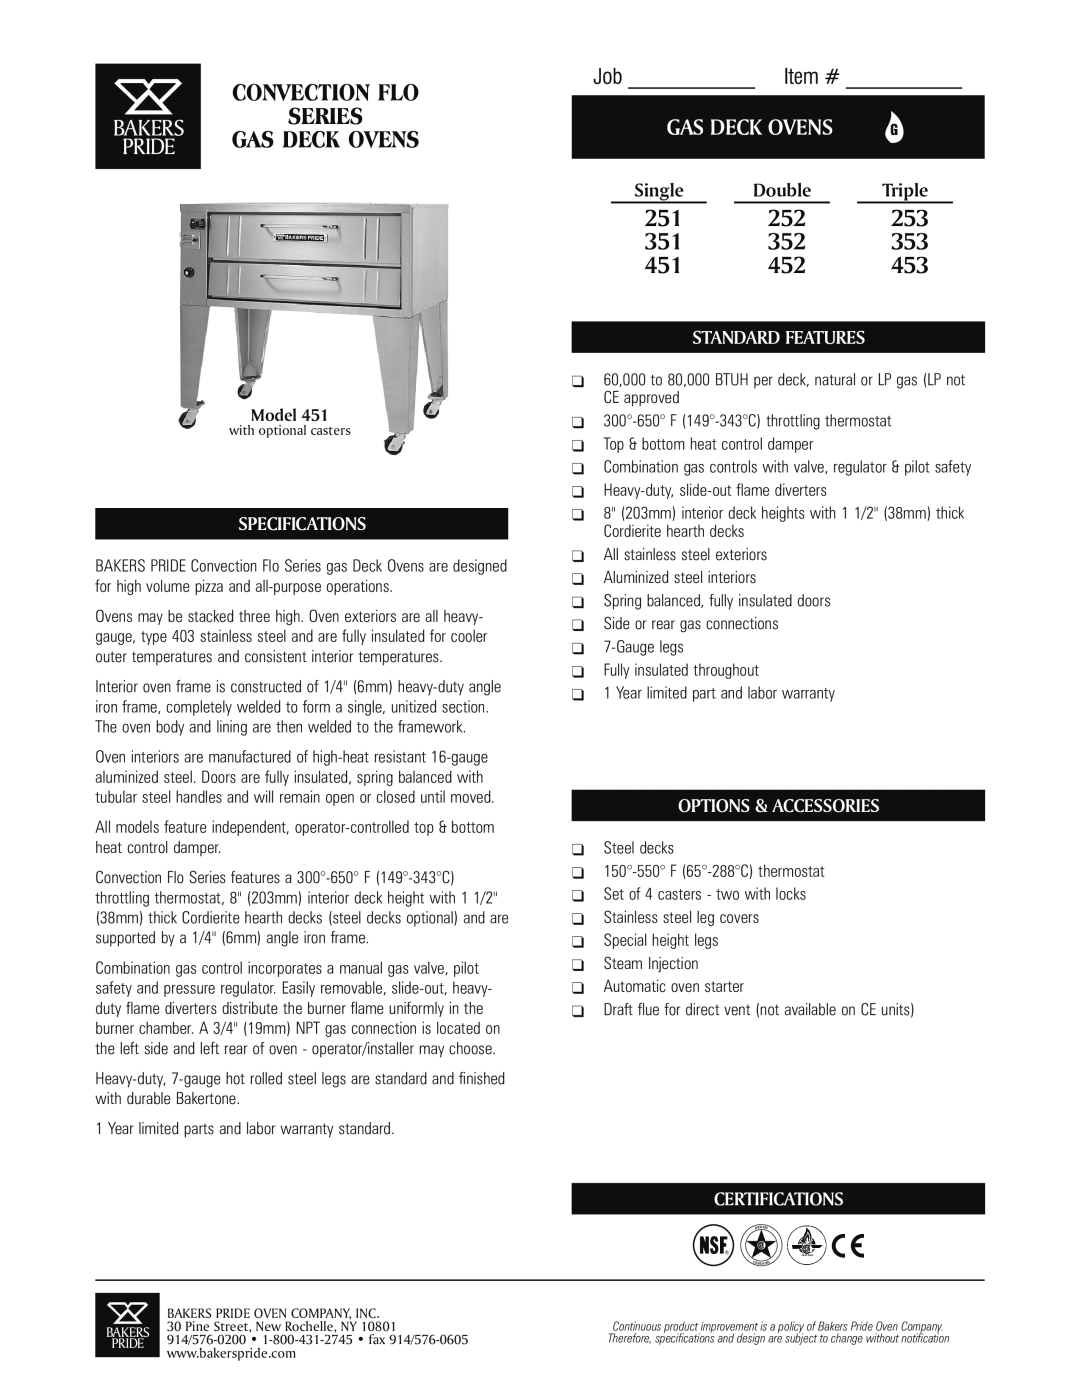 Bakers Pride Oven 353 specifications Convection Flo, Job Item #, Series, Gas Deck Ovens, Specifications, Single, Double 